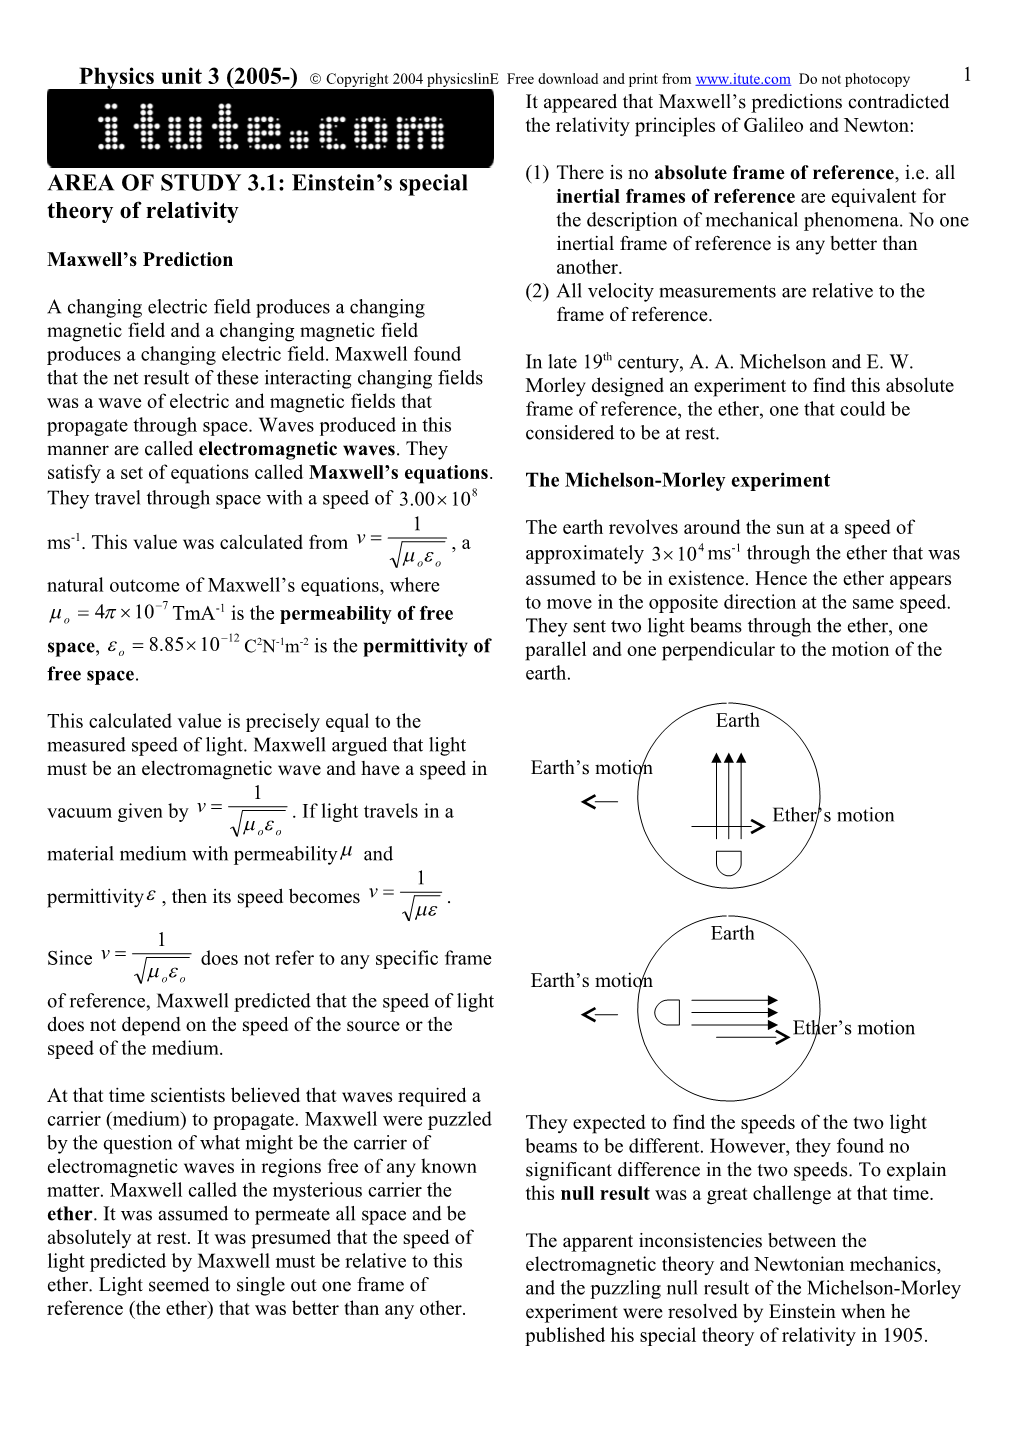 AREA of STUDY 3: Einstein S Special Theory of Relativity